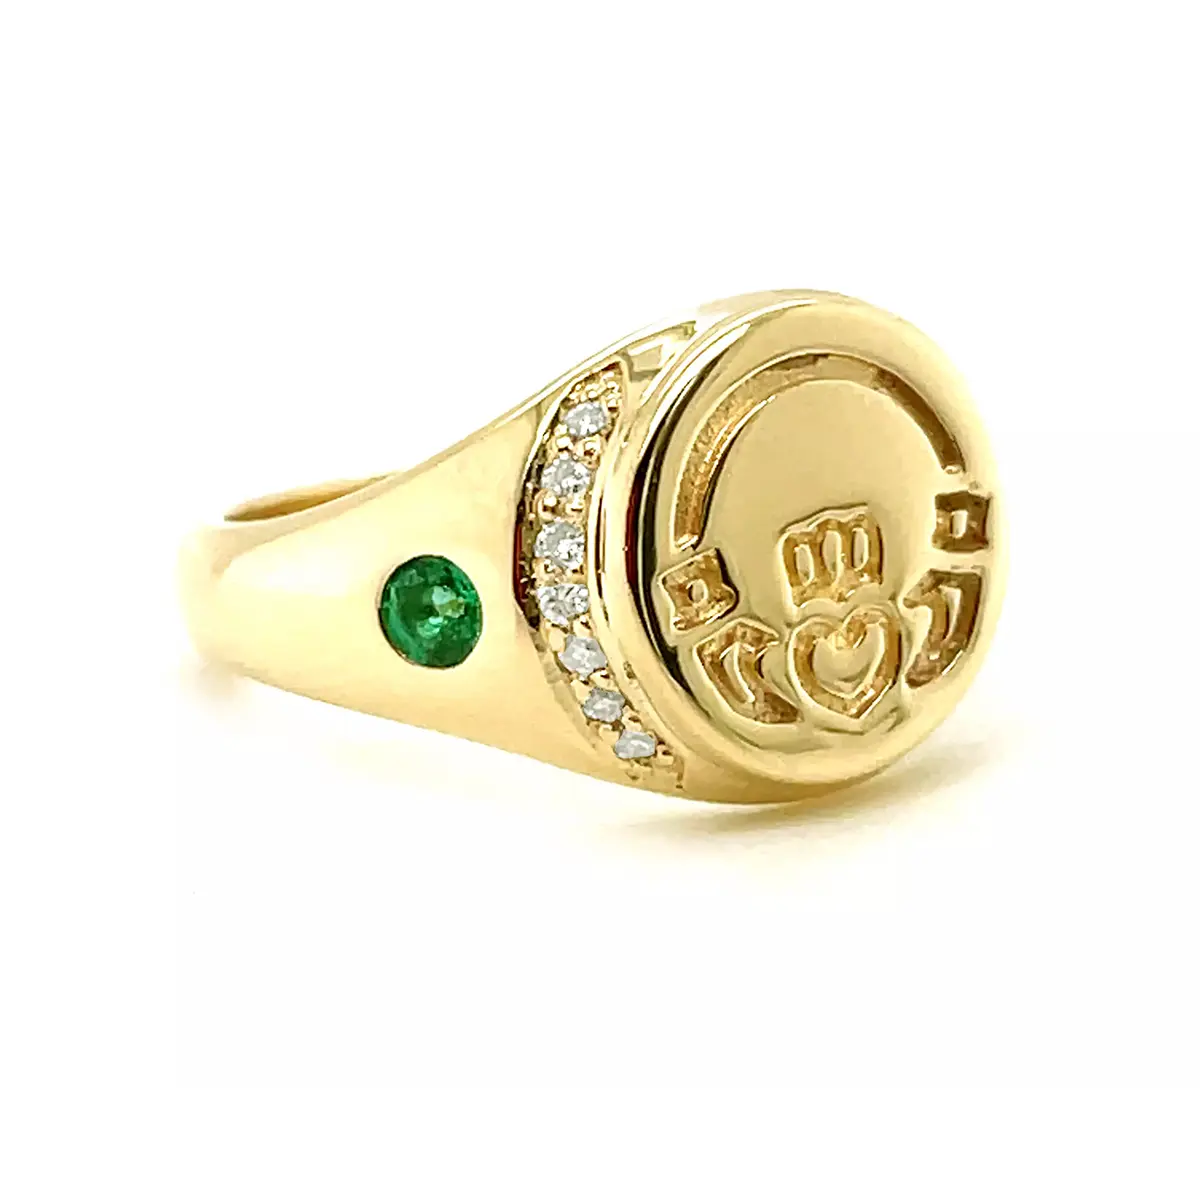 1_gold And Emerald Mens Seal Ring...